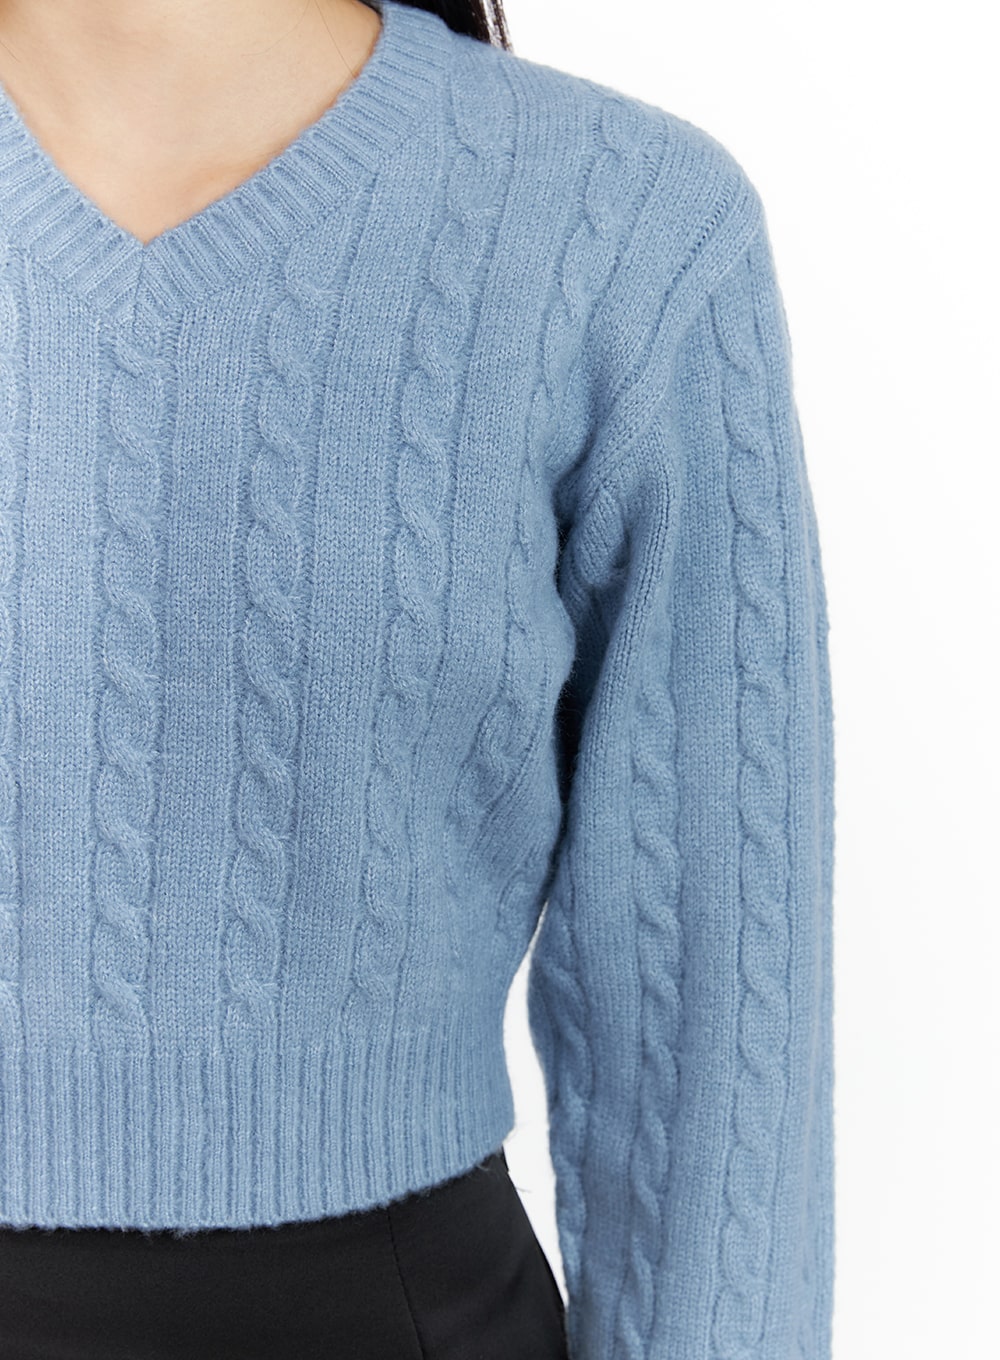 Cable Knit V-Neck Cropped Long Sleeve CF416 - Light Blue S/M